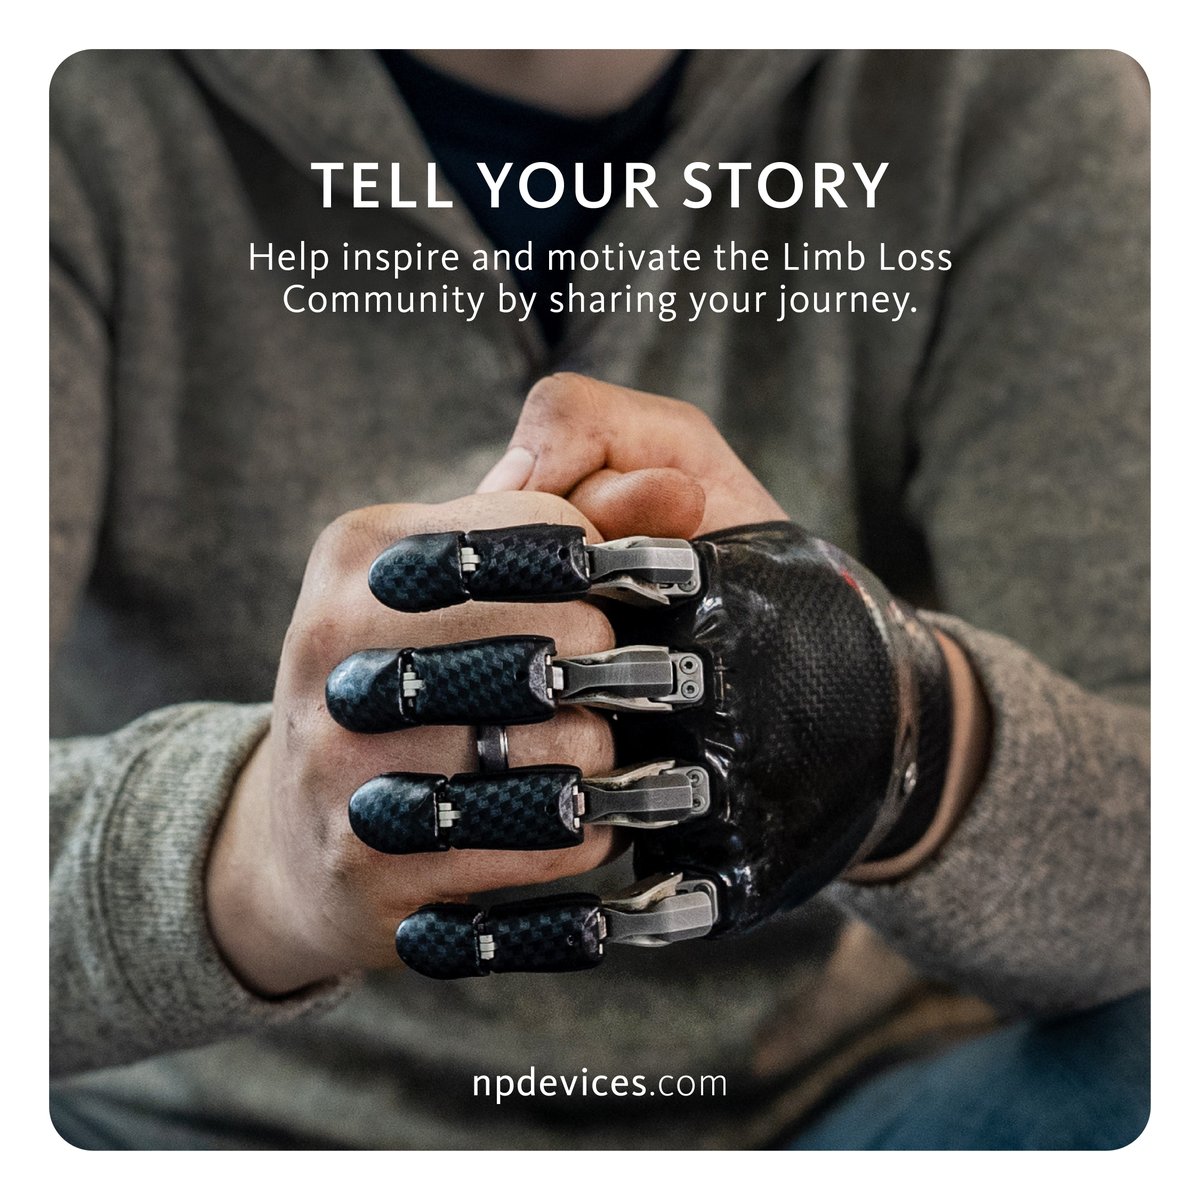 Be part of our endeavor to assist individuals seeking prosthetic intervention. Open up about your journey, achievements, and obstacles. Your experiences carry profound inspiration for those adjusting to life post-amputation. #ShareYourStory here: ow.ly/2u6U50Rufq7